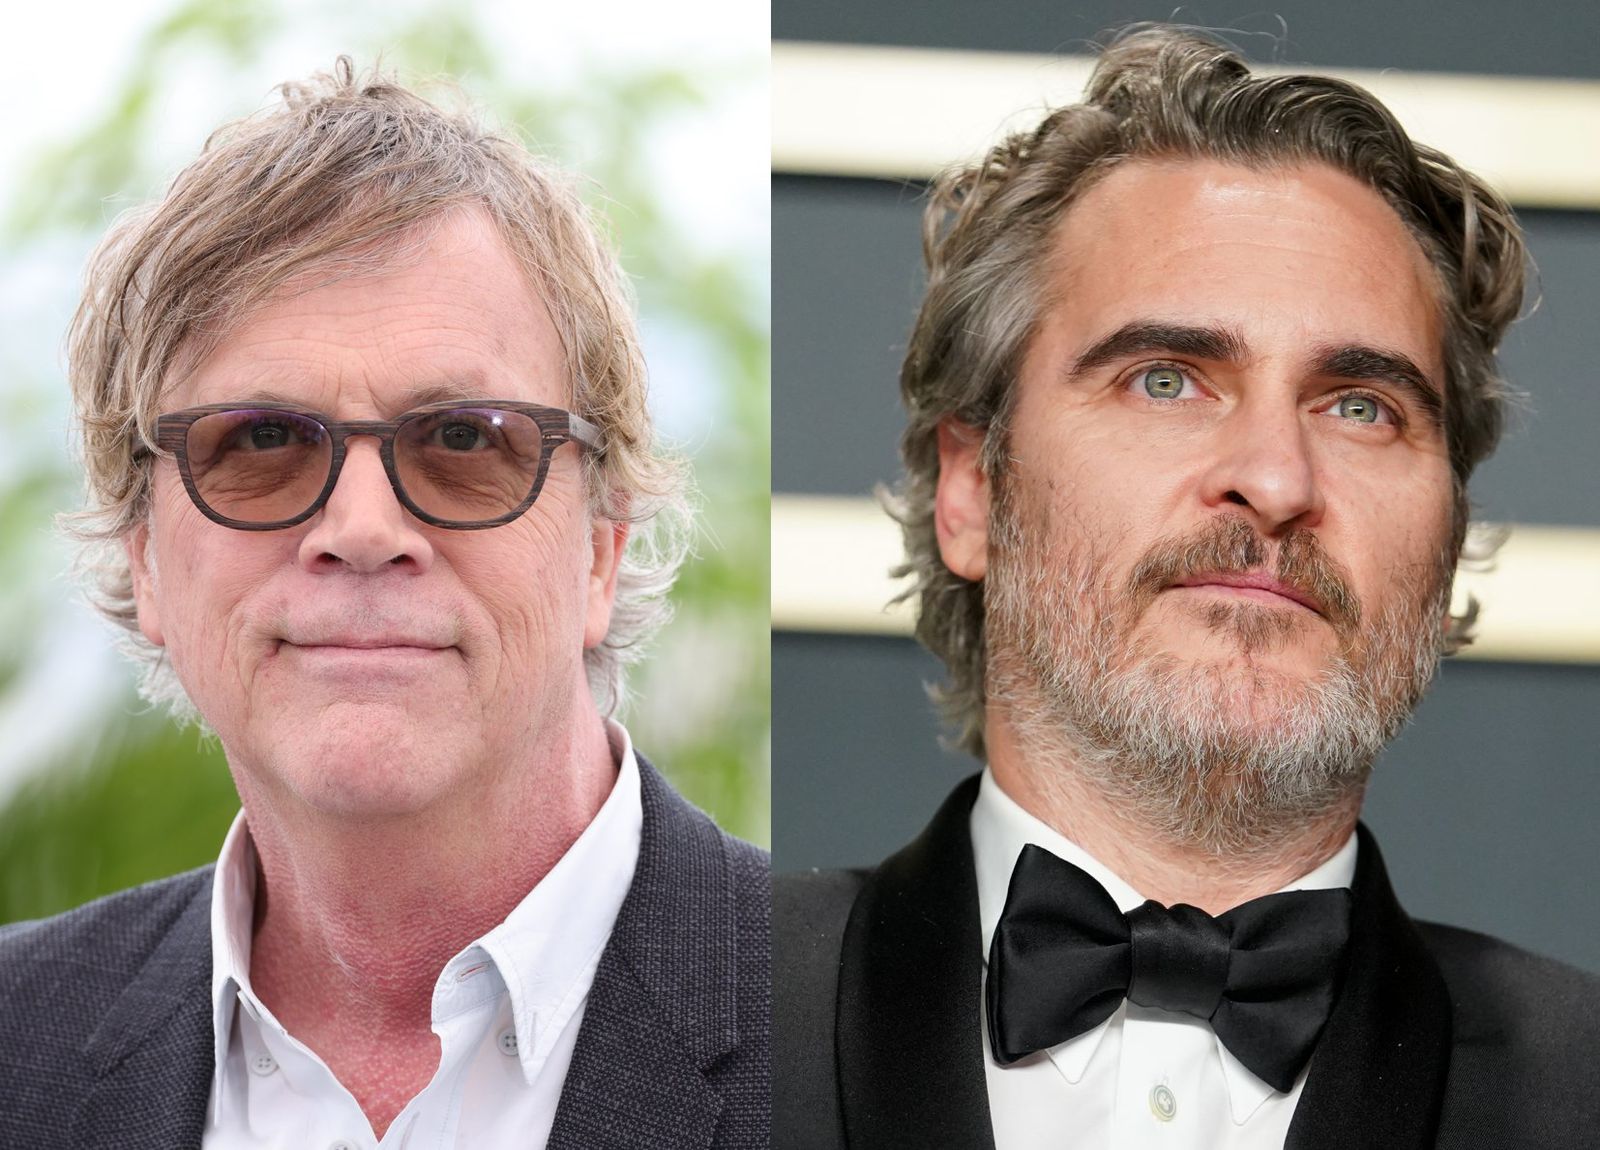 Todd Haynes and Joaquin Phoenix all set for a gay romance film